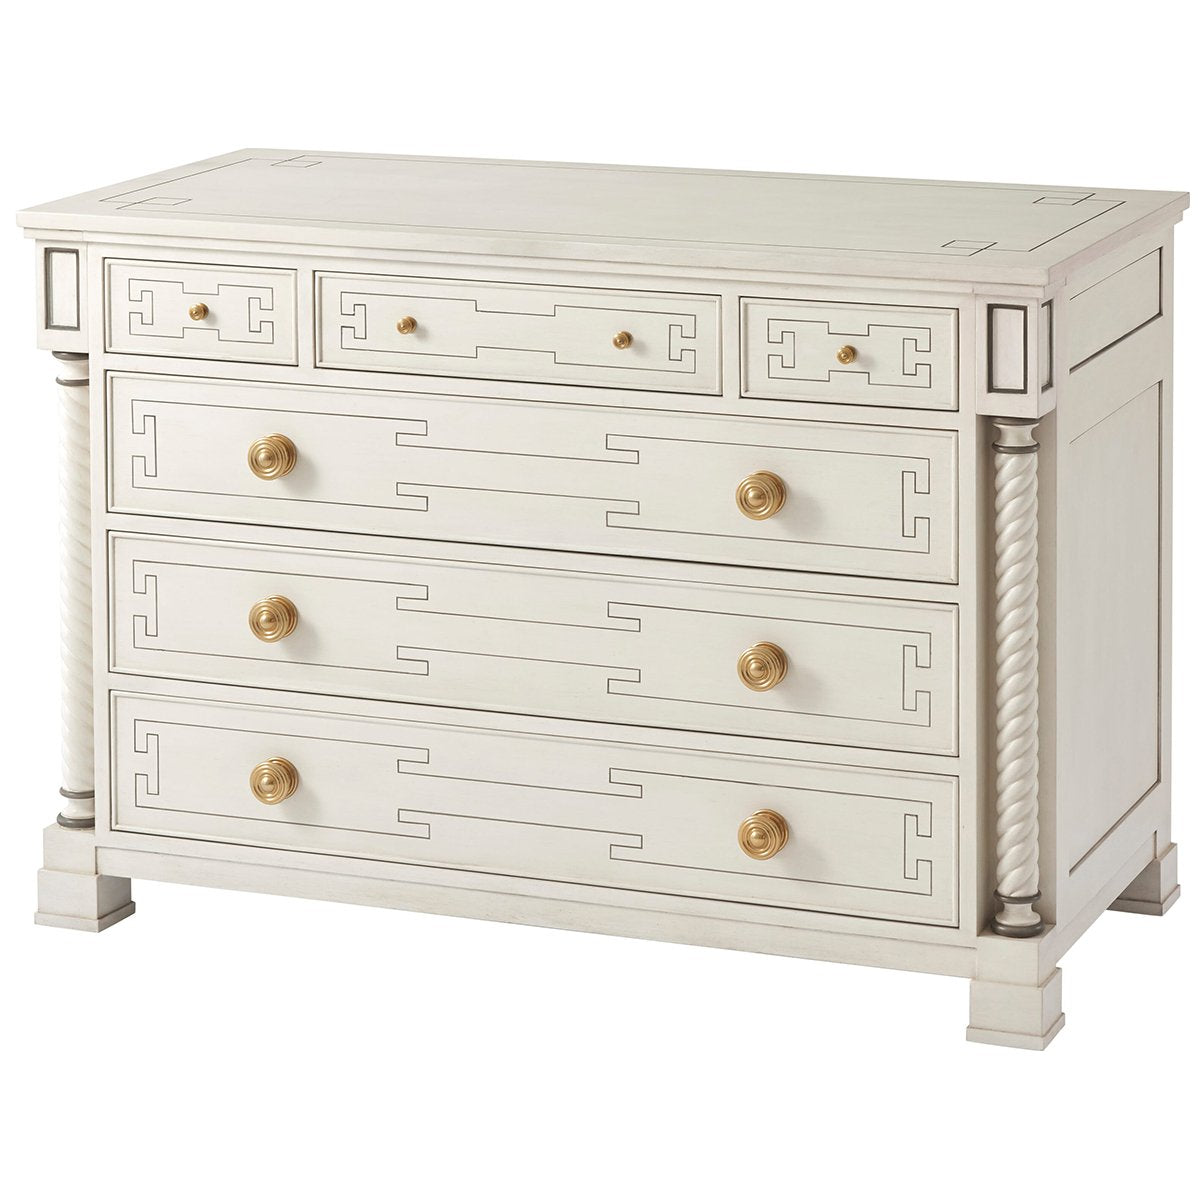 Theodore Alexander Cecil Chest of Drawers